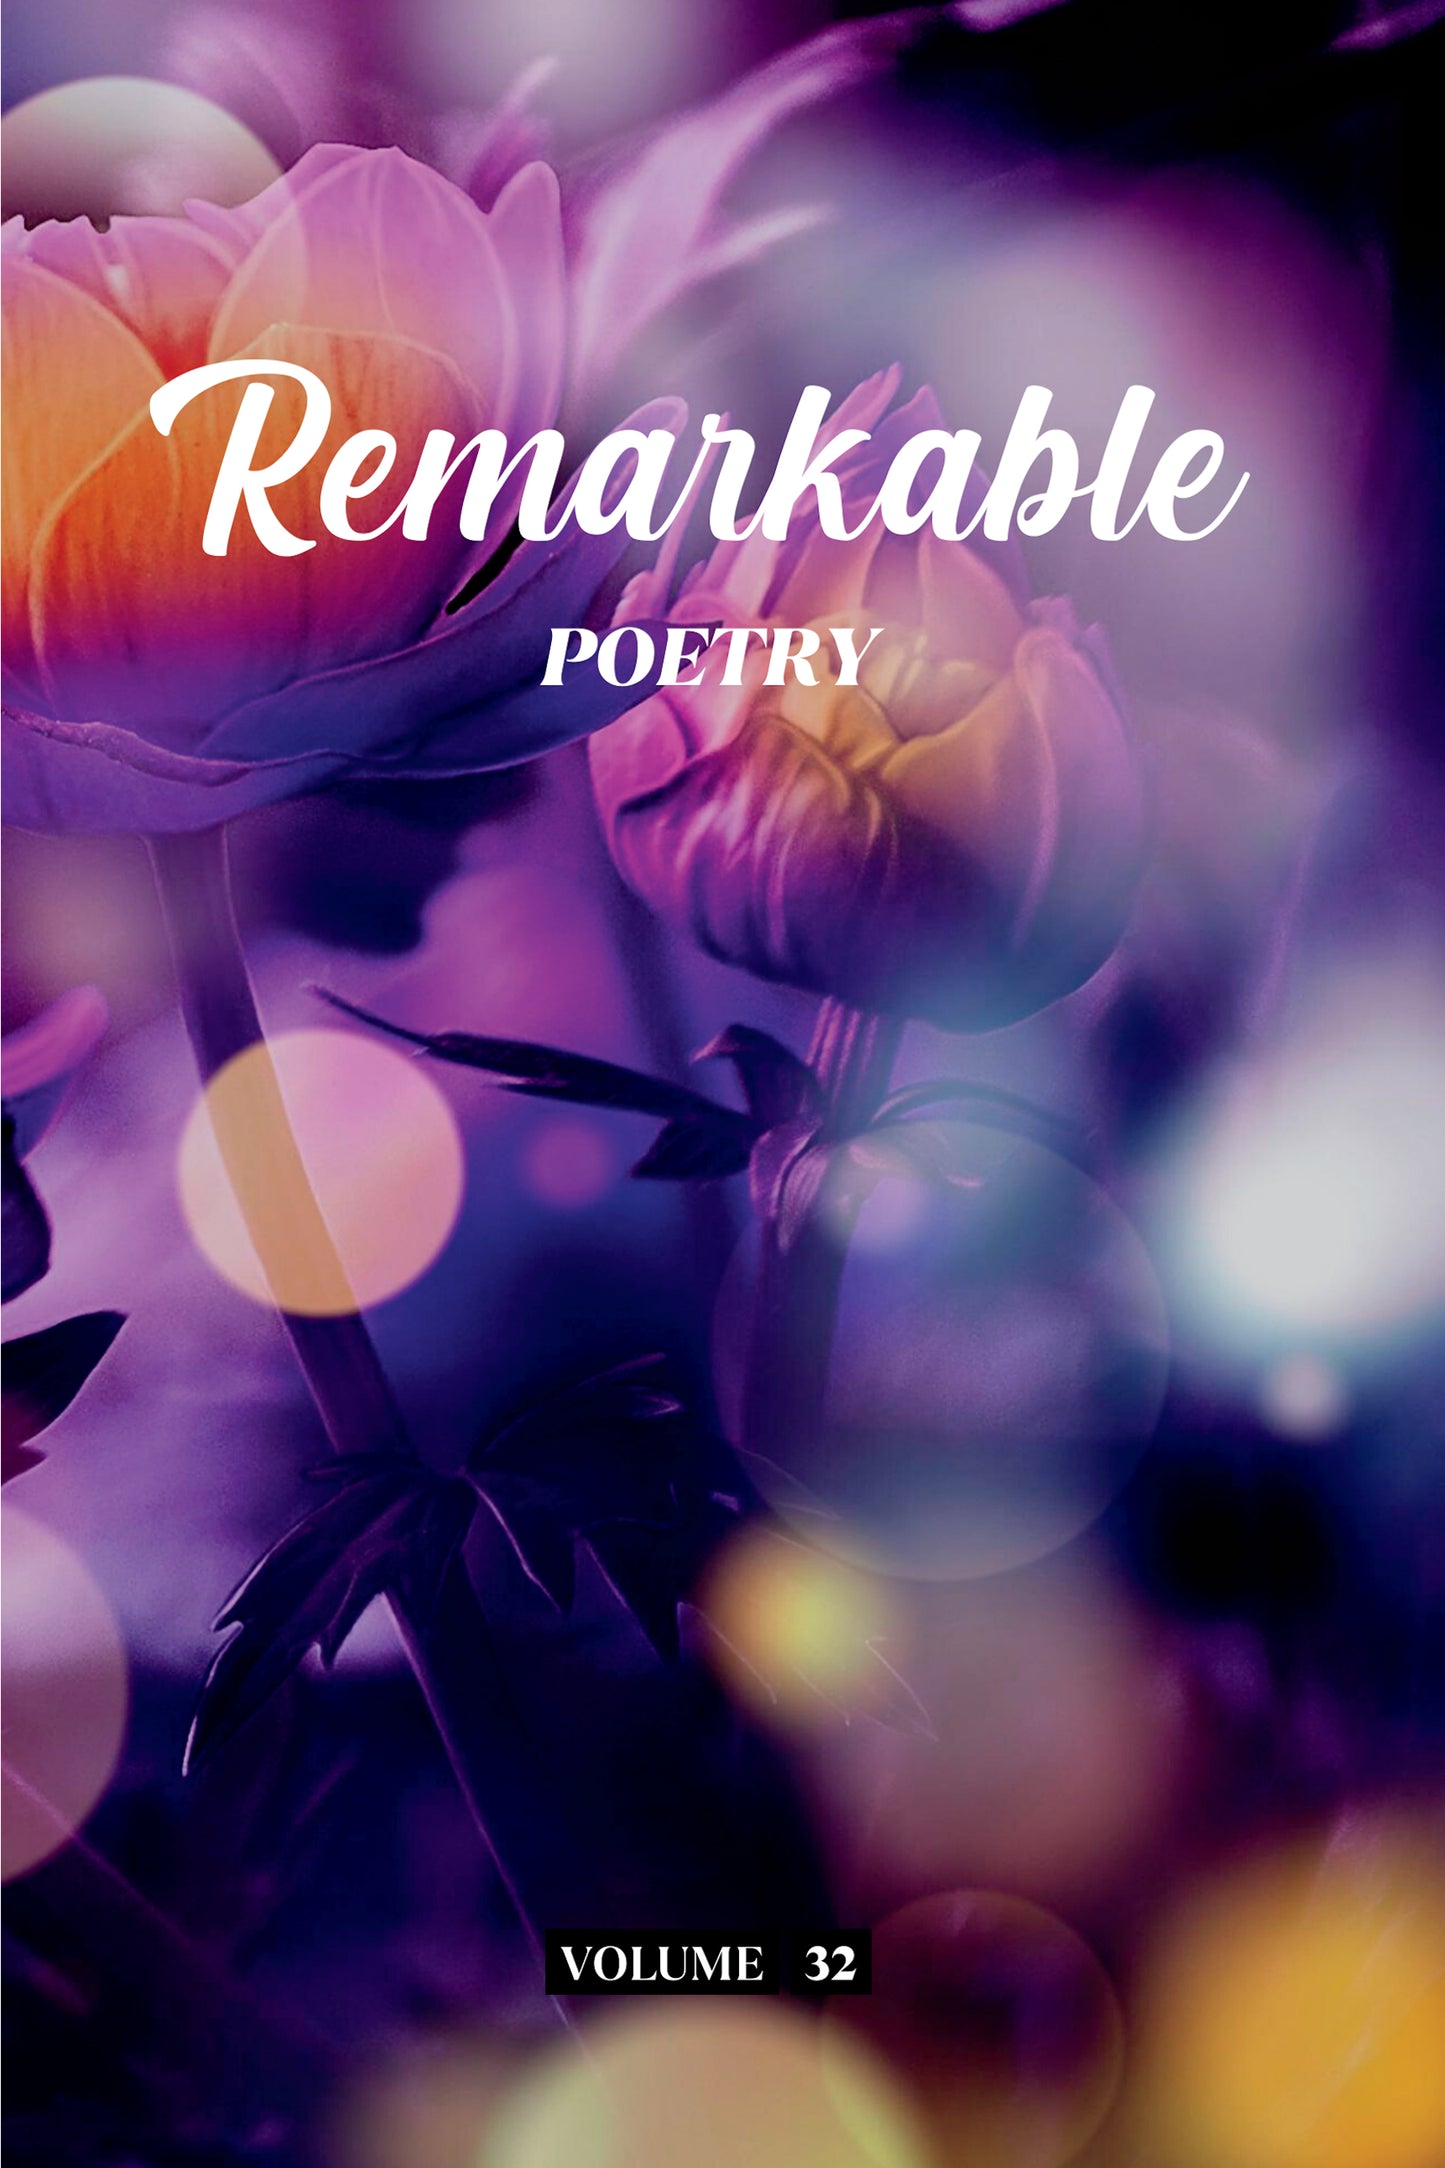 Remarkable Poetry (Volume 32) - Physical Book (Pre-Order)